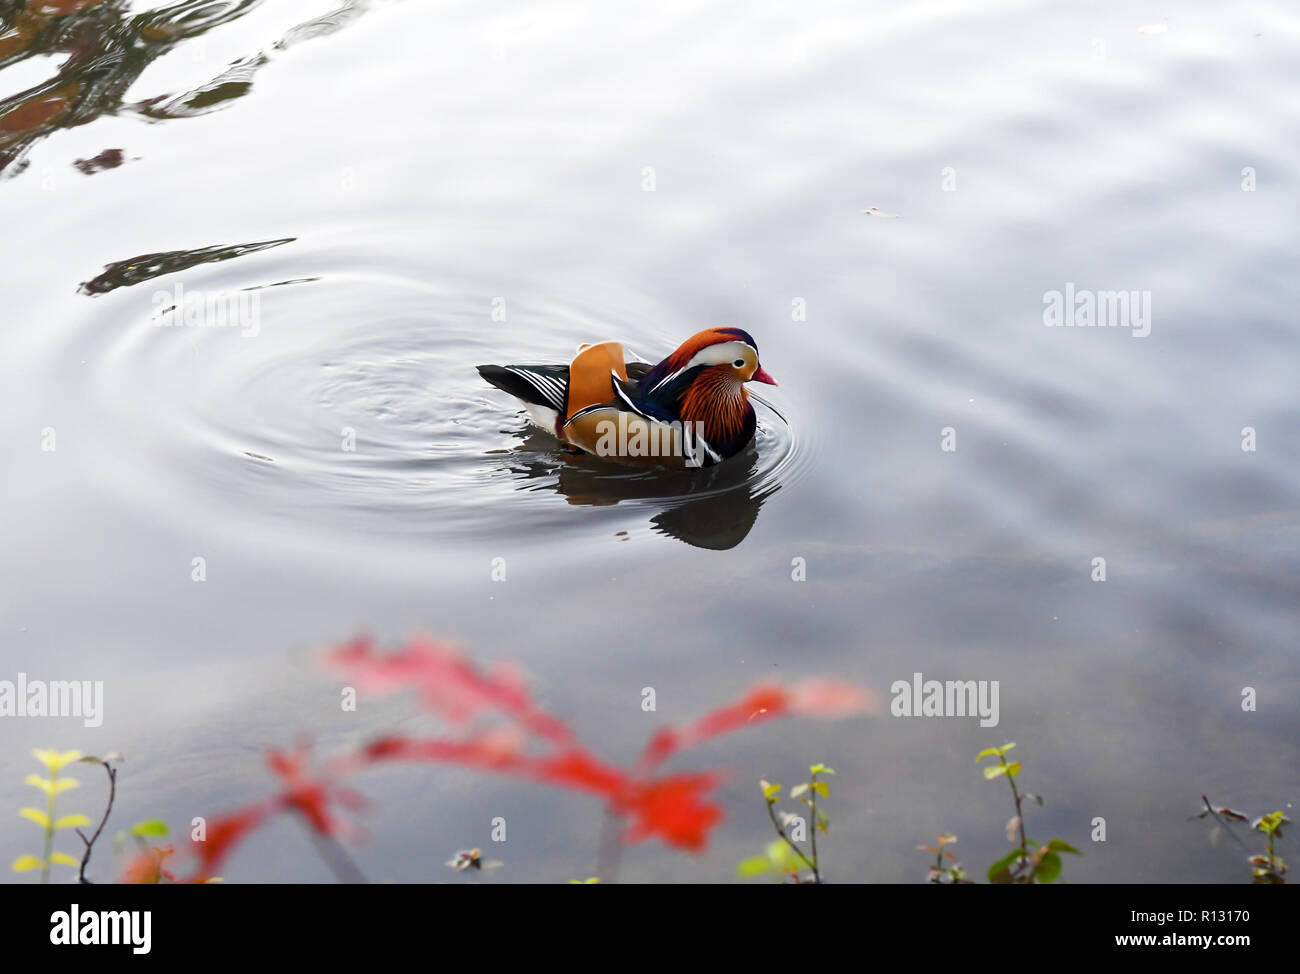 New York, USA. 8th Nov, 2018. A Mandarin duck swims on a pond at the Central Park in New York, the United States, on Nov. 8, 2018. Mandarin ducks are native to East Asia and renowned for their dazzling multicolored feathers. This rare Mandarin duck, first spotted in early October, has become a new star at the Central Park, one of New York City's most-visited attractions. Credit: Li Rui/Xinhua/Alamy Live News Stock Photo